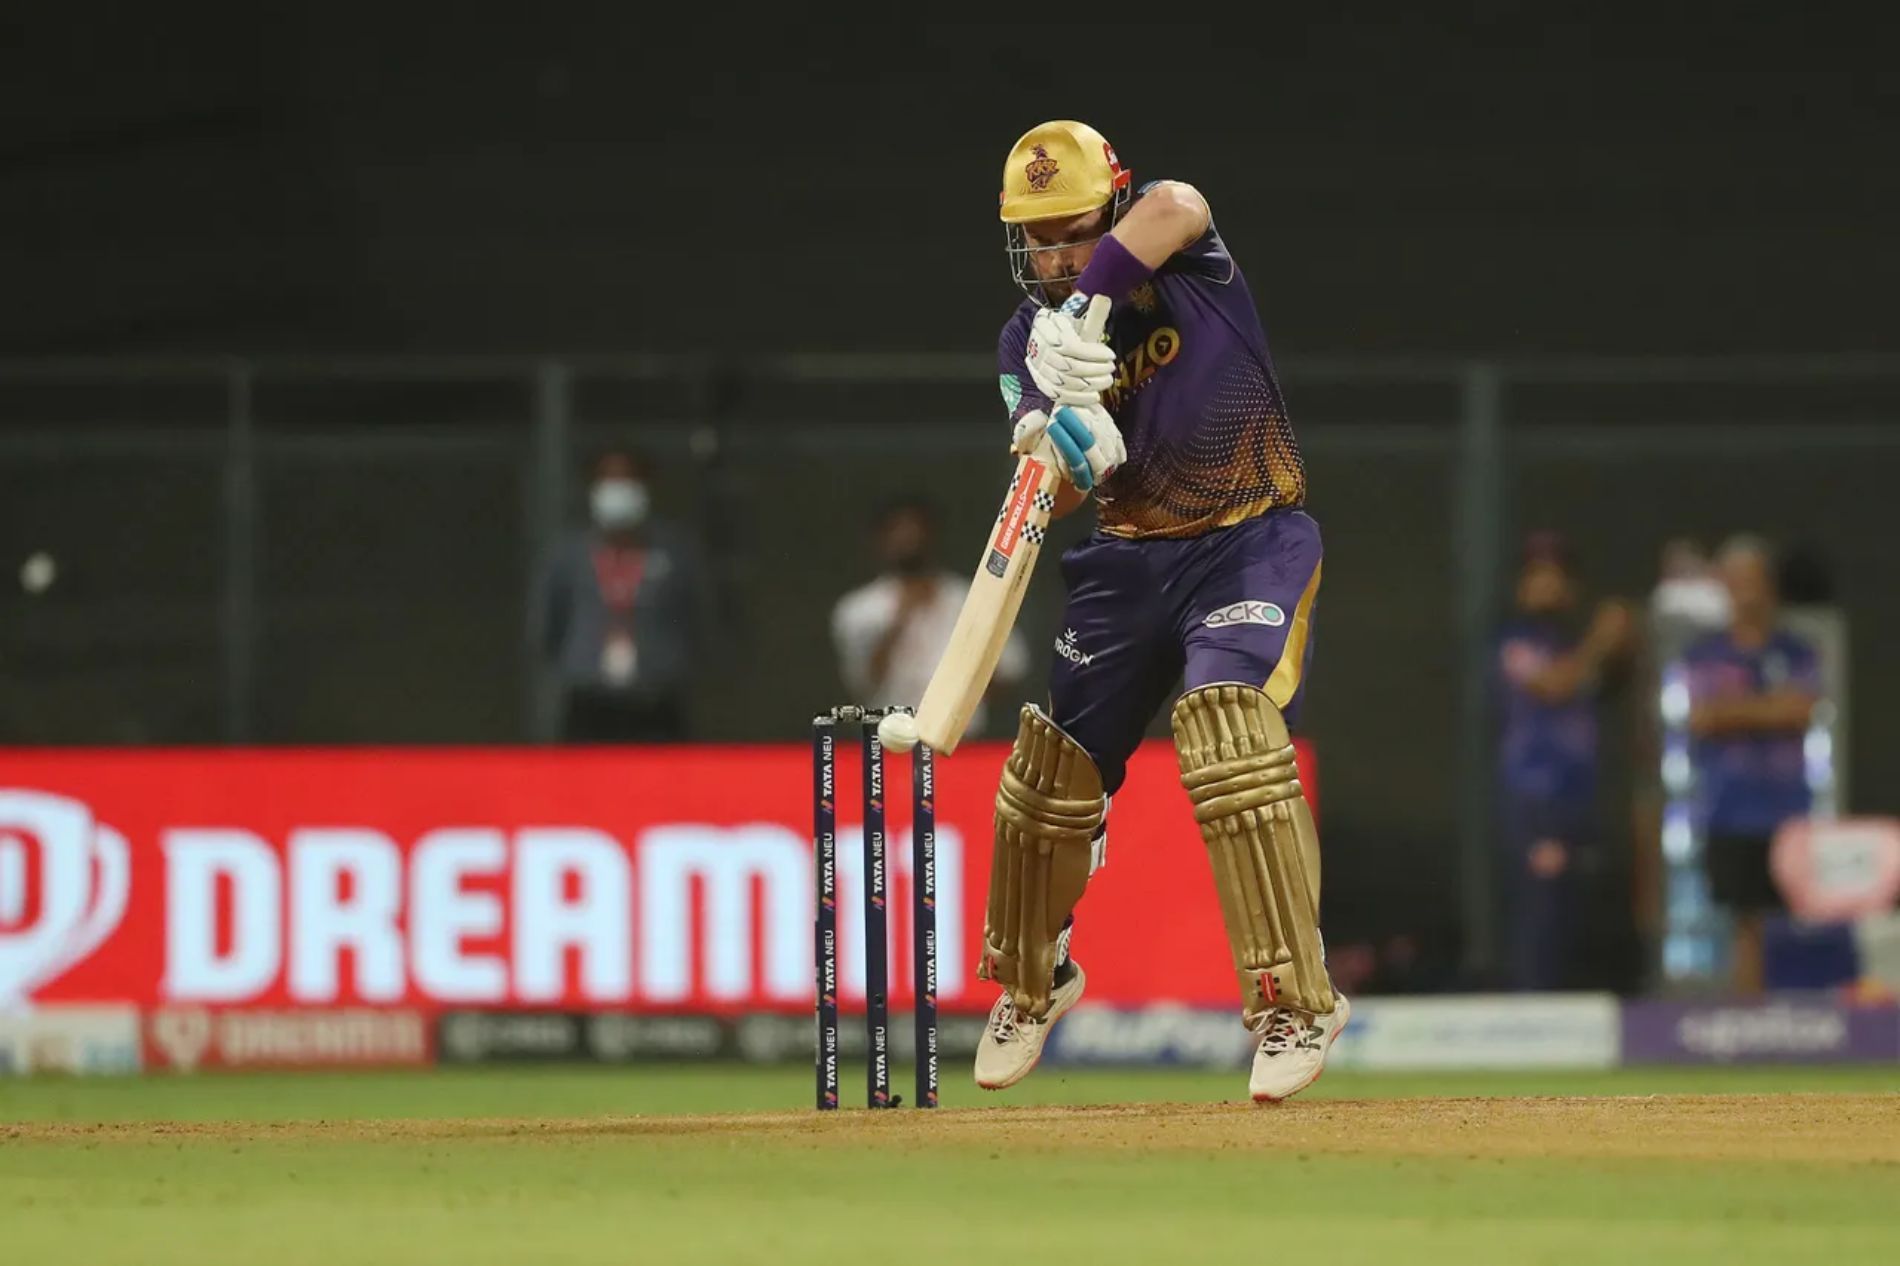 Aaron Finch struggles against the incoming deliveries. Pic: IPLT20.COM